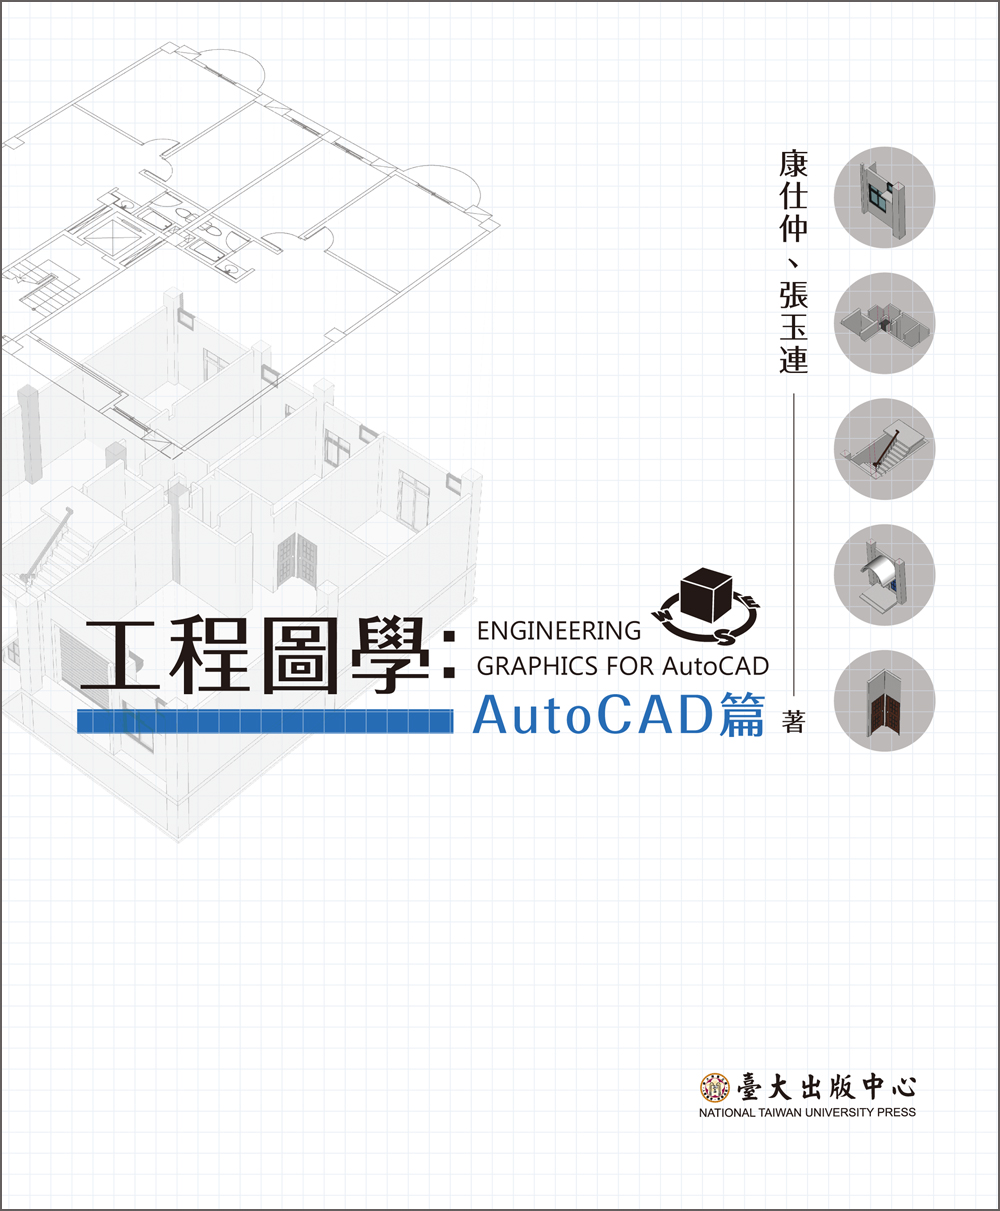 Engineering Graphics for AutoCAD